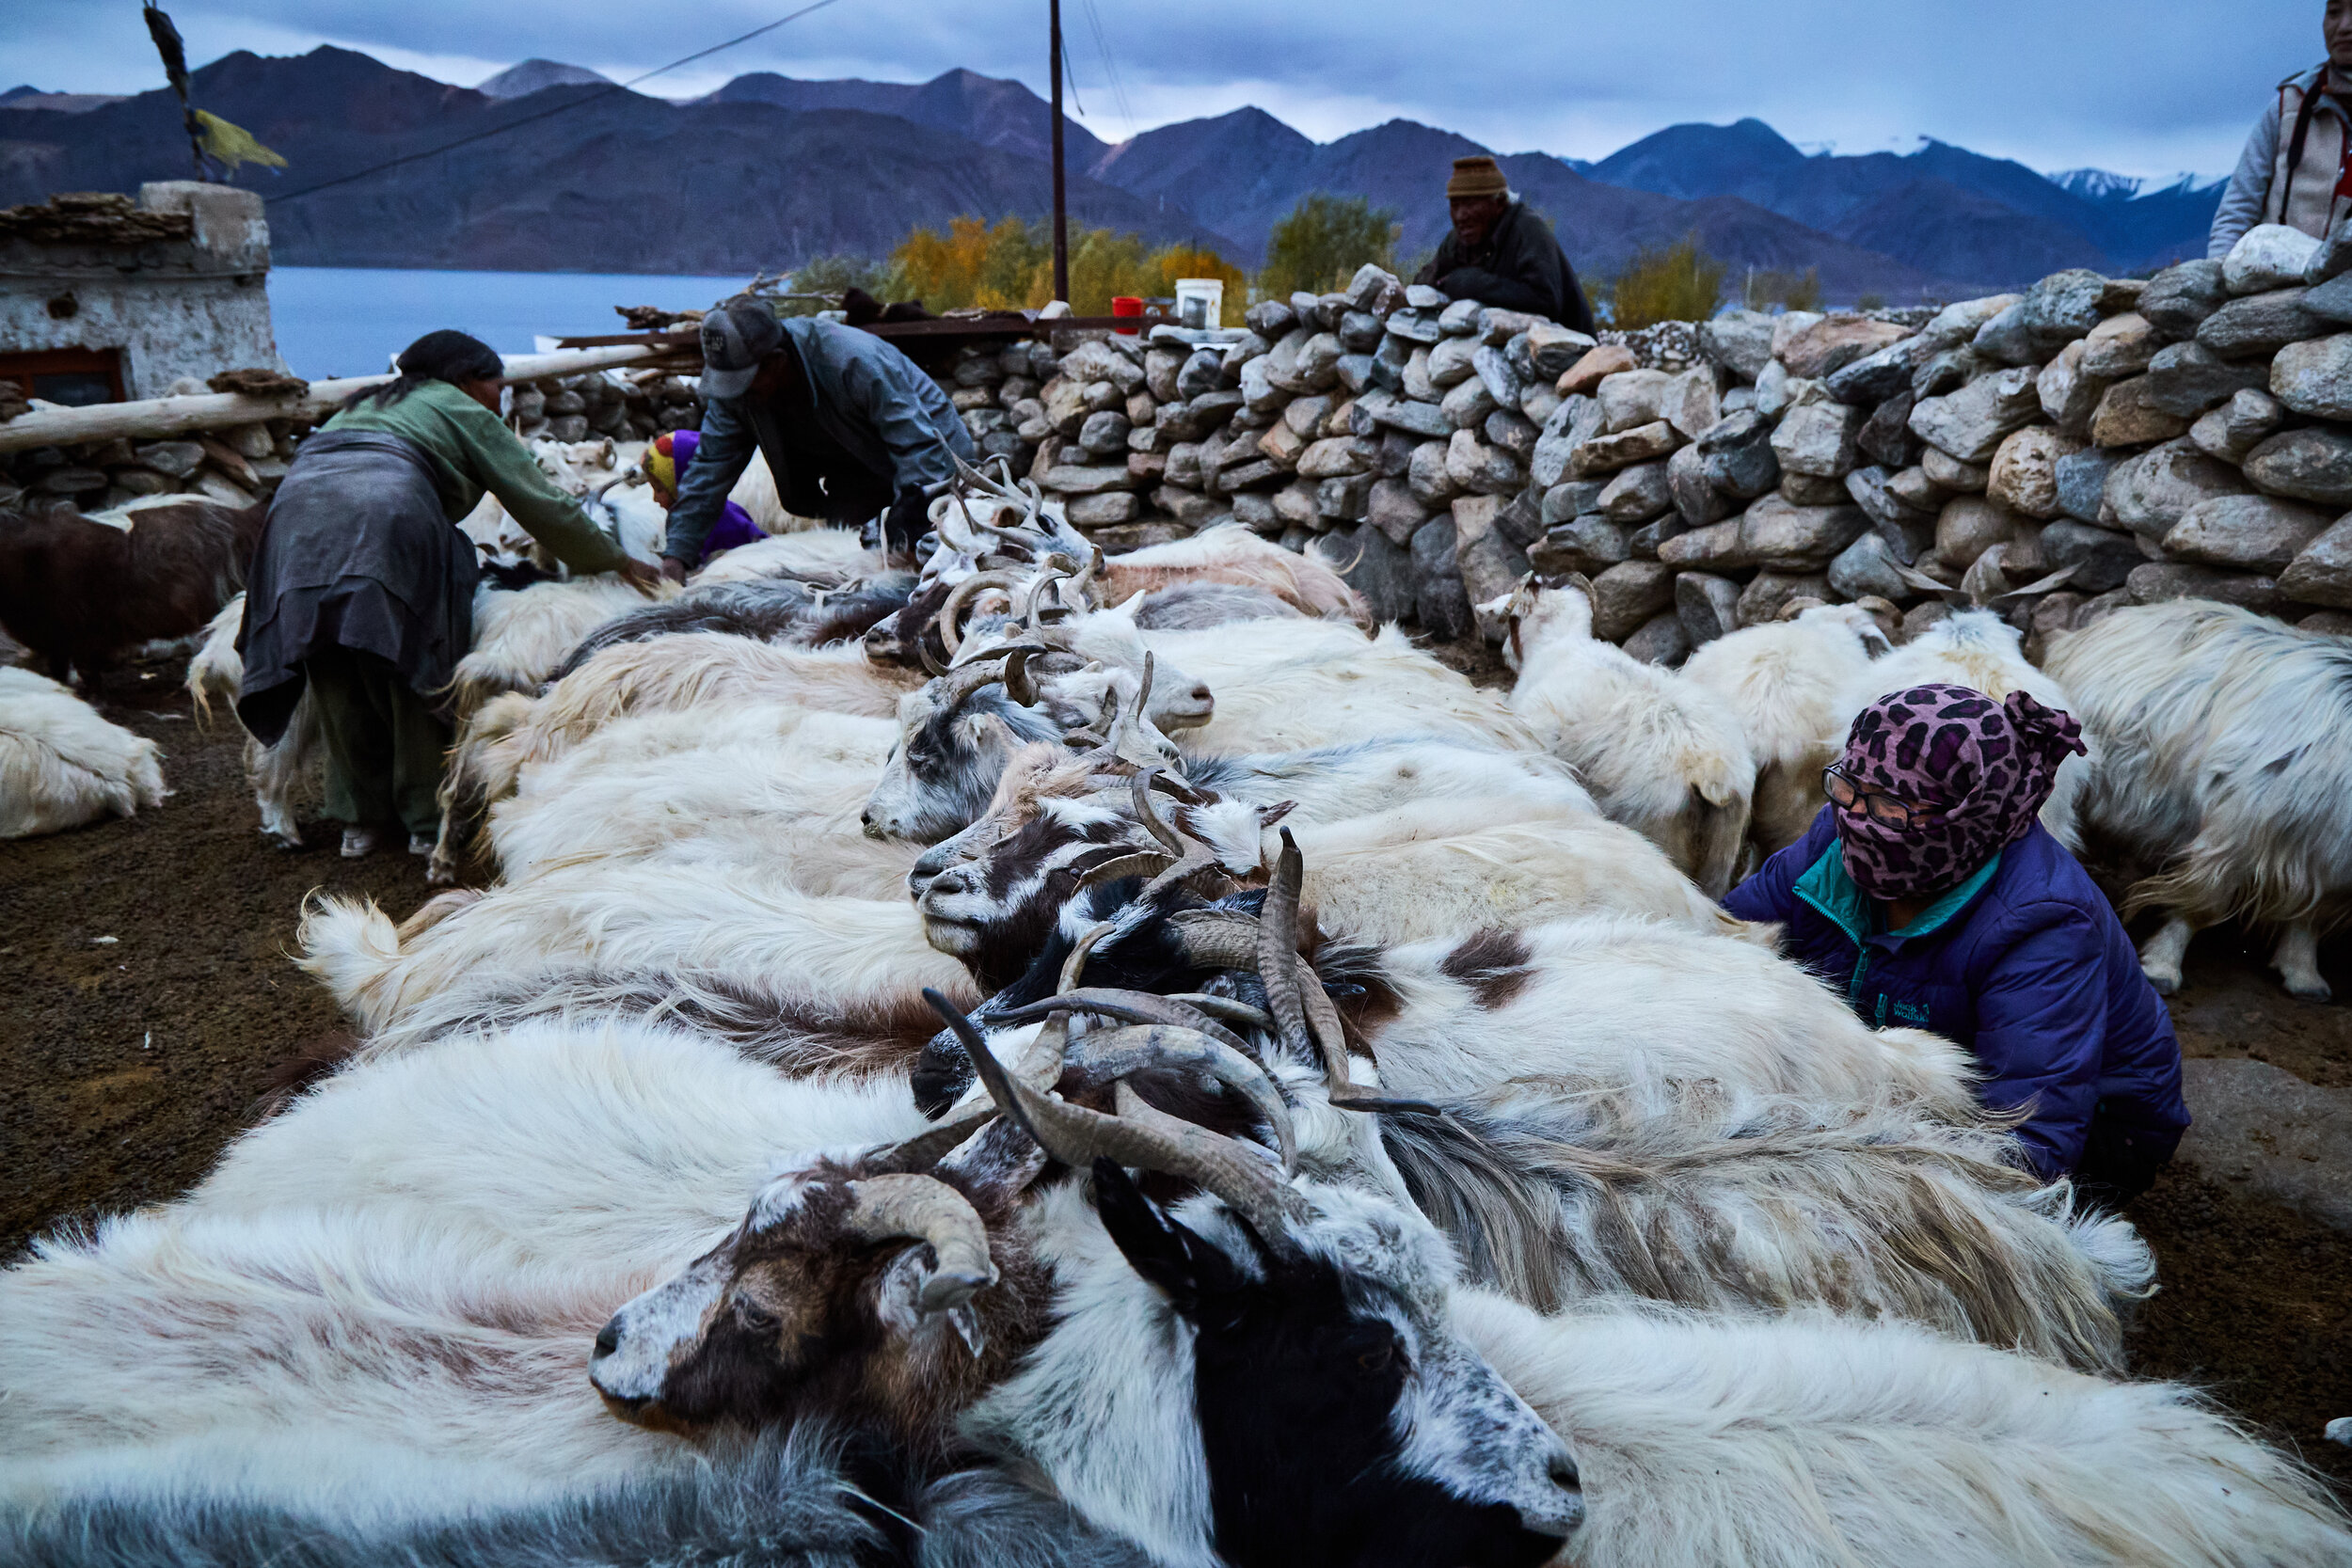  Pashmina wool is one of the major income source for many of the nomadic herding communities. A group of herders tying the pashmina goats together at dusk as few start to milk the animals. 